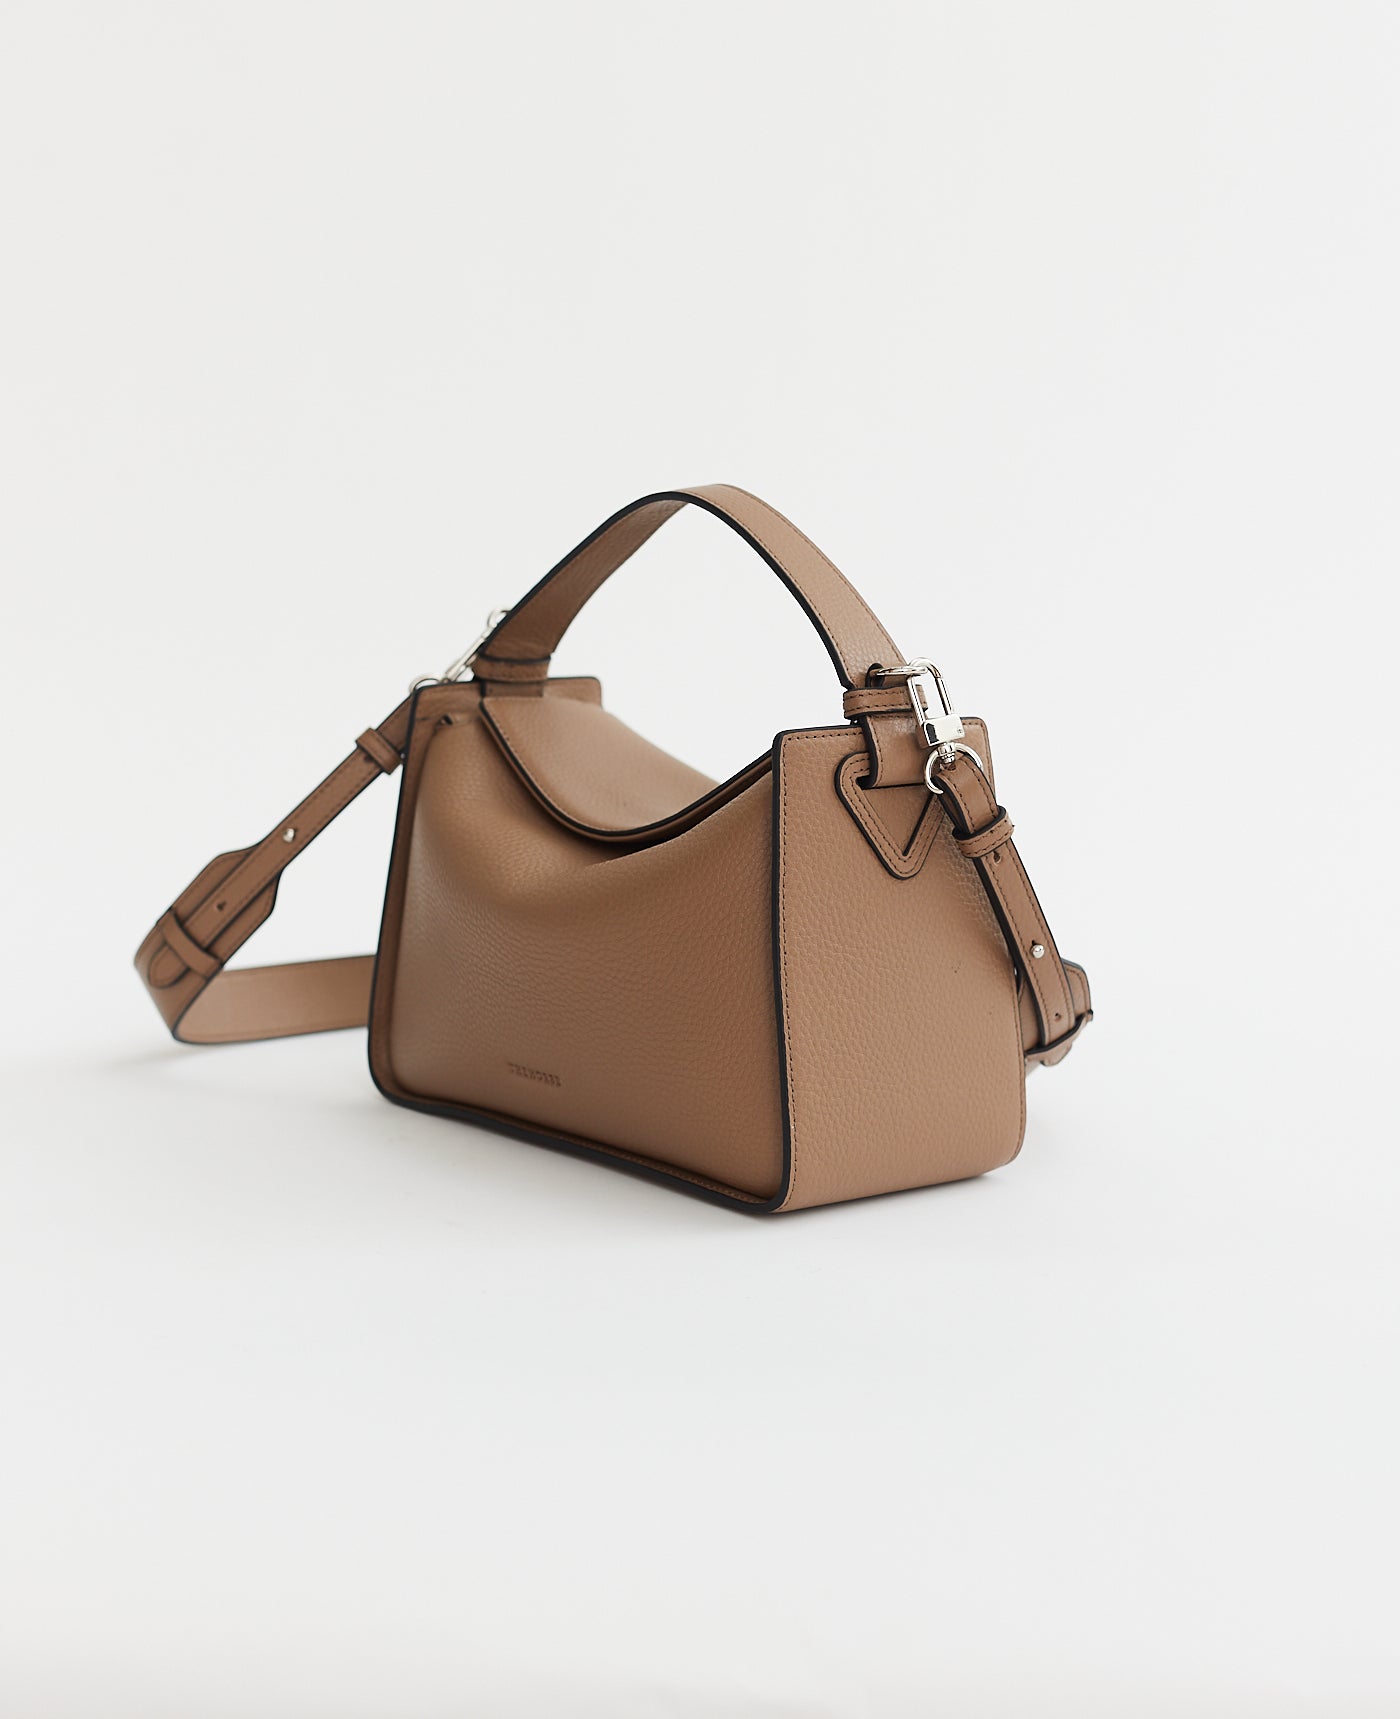 Clementine Bag in Taupe | The Horse